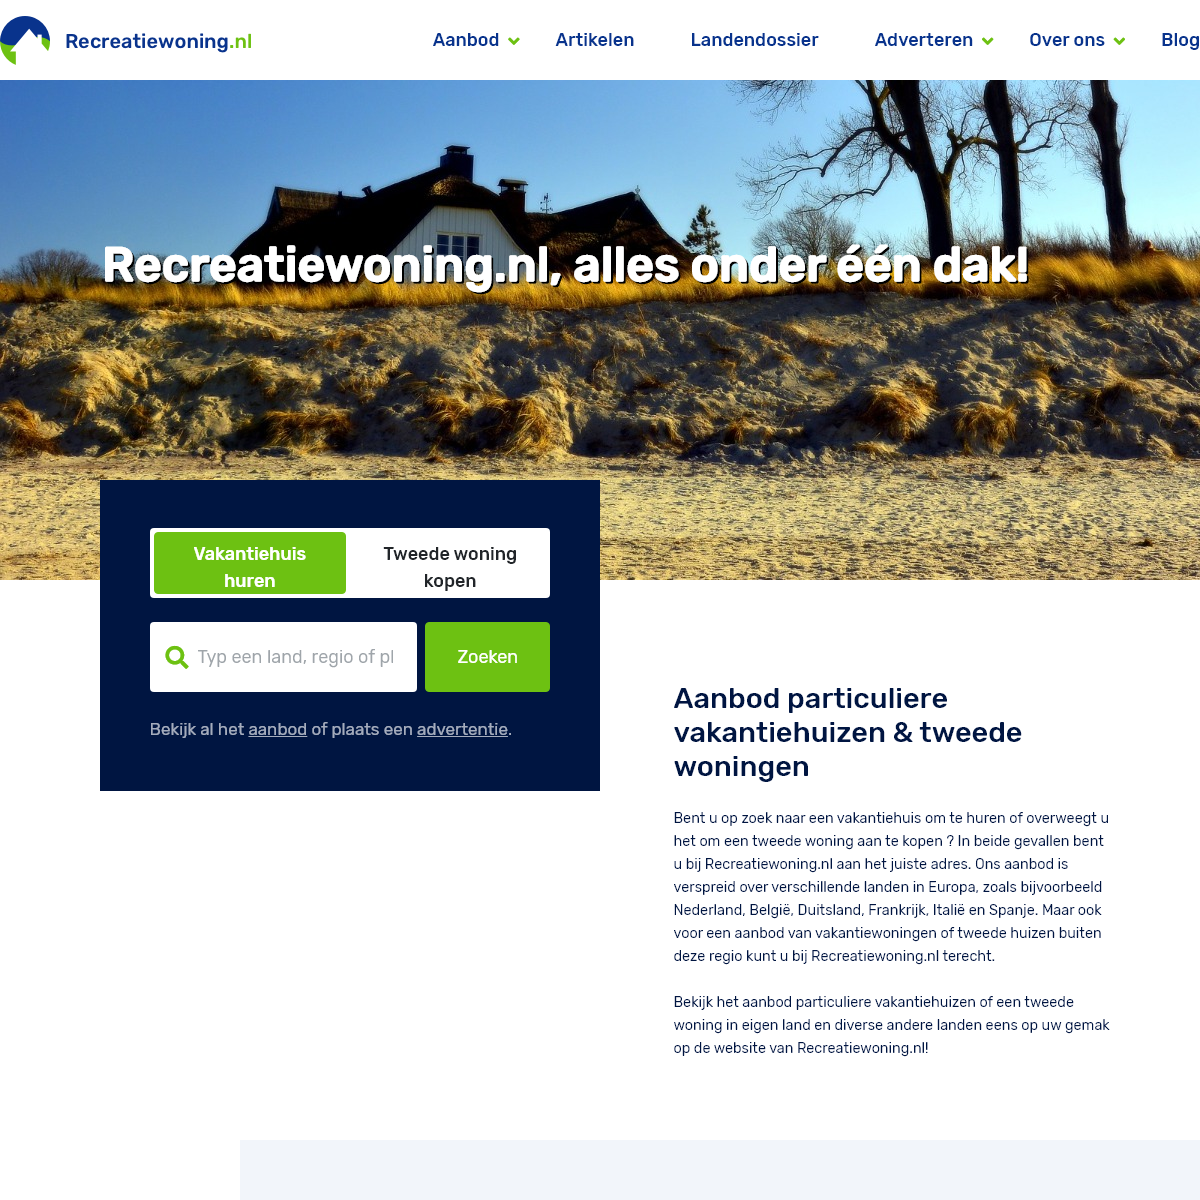 A complete backup of recreatiewoning.nl